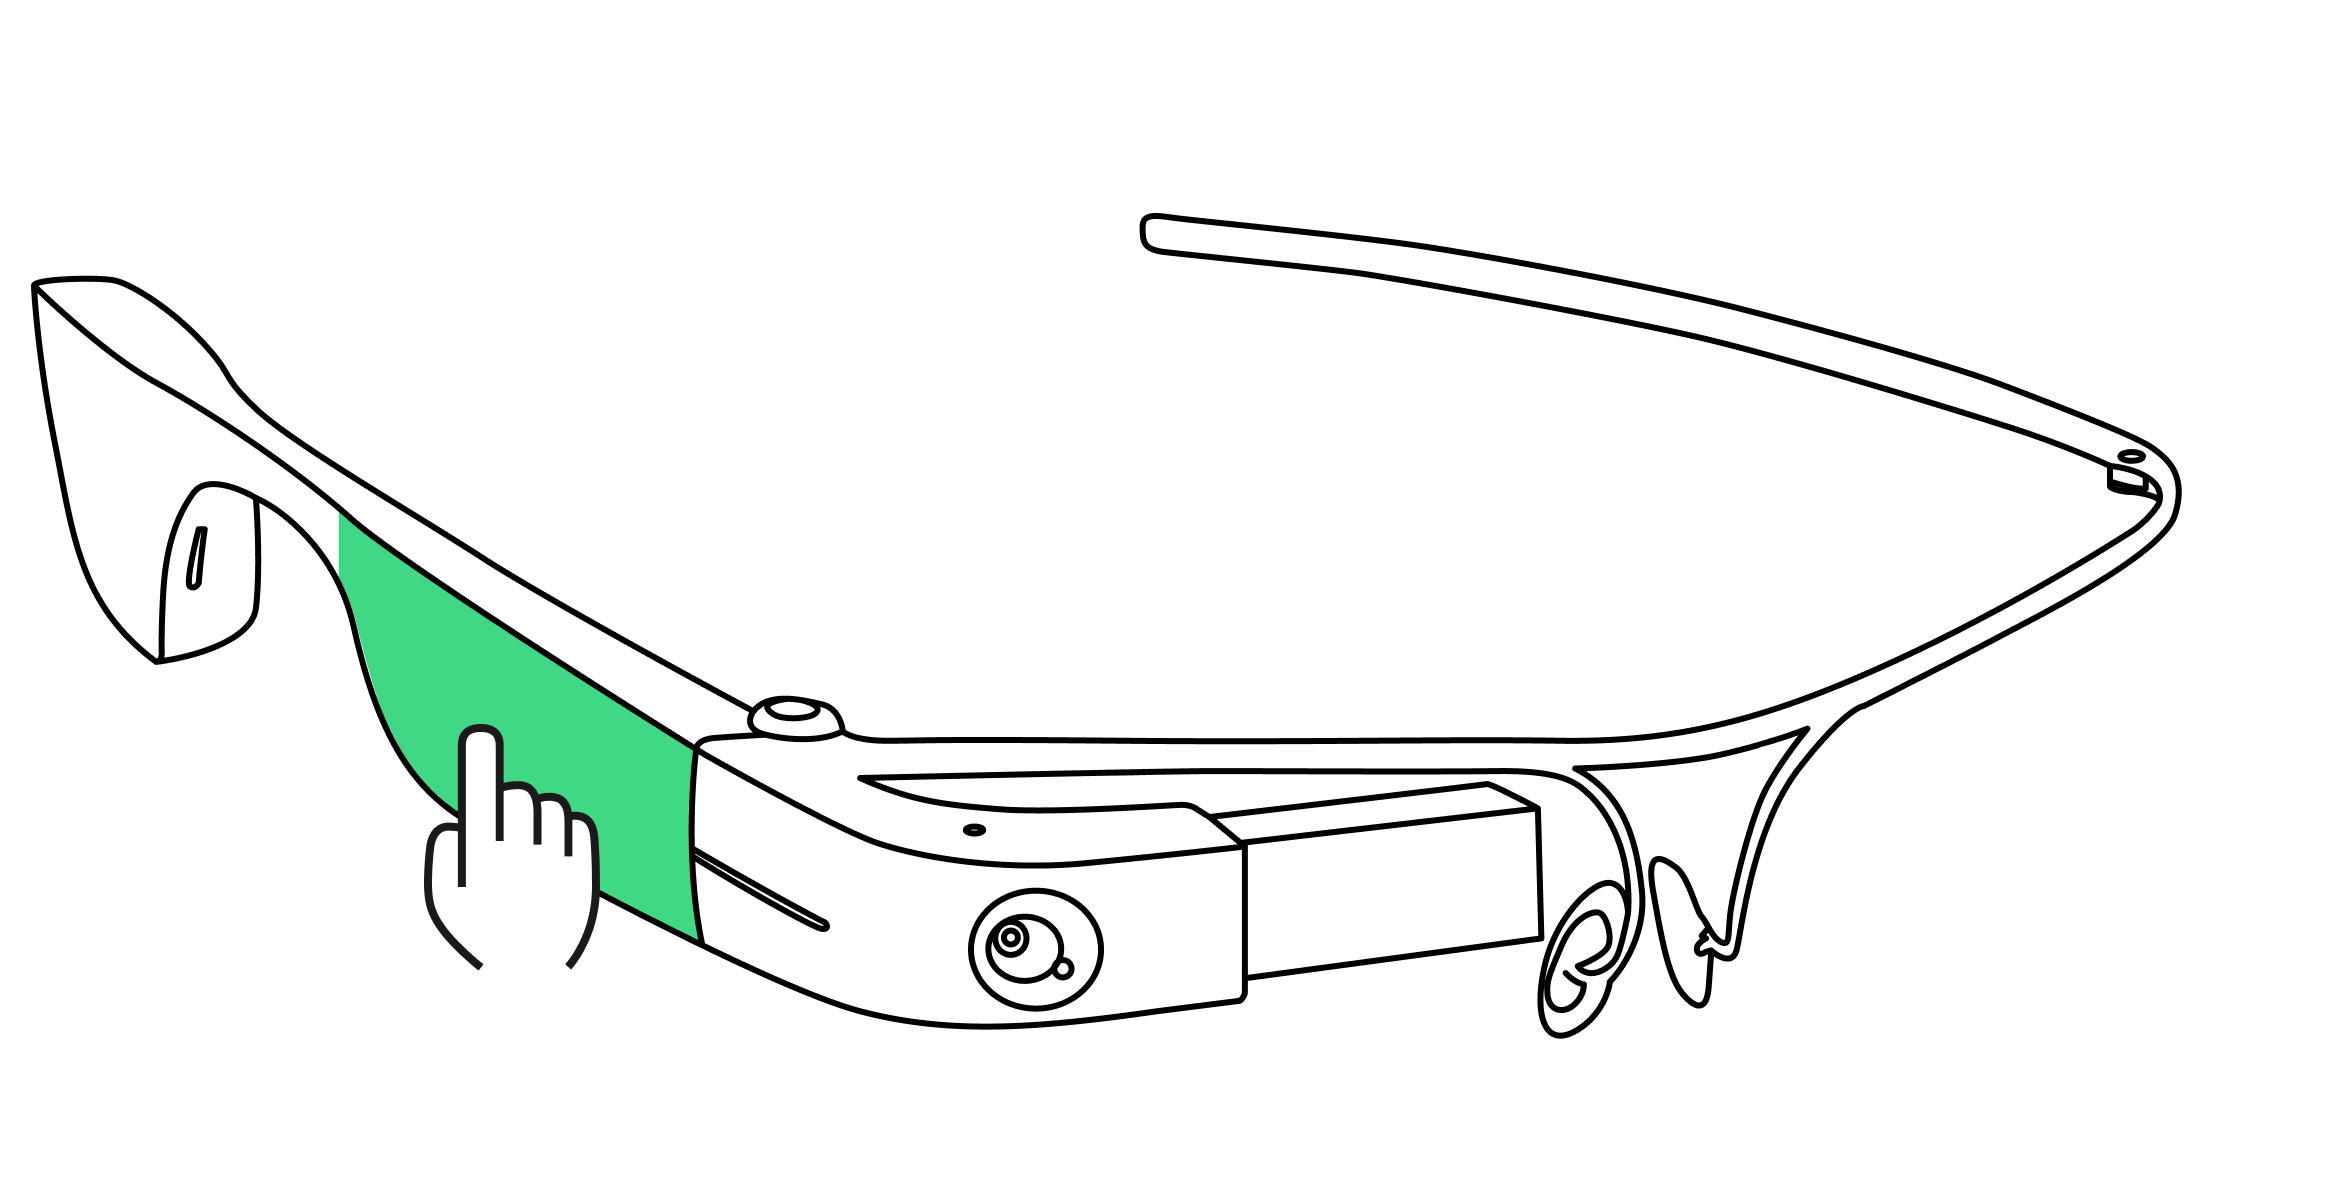 Illustration of the Envision Glasses Touchpad. The Envision Glasses are shown and the touchpad, that is on the front part of the Envision Glasses Body, is highlighted.